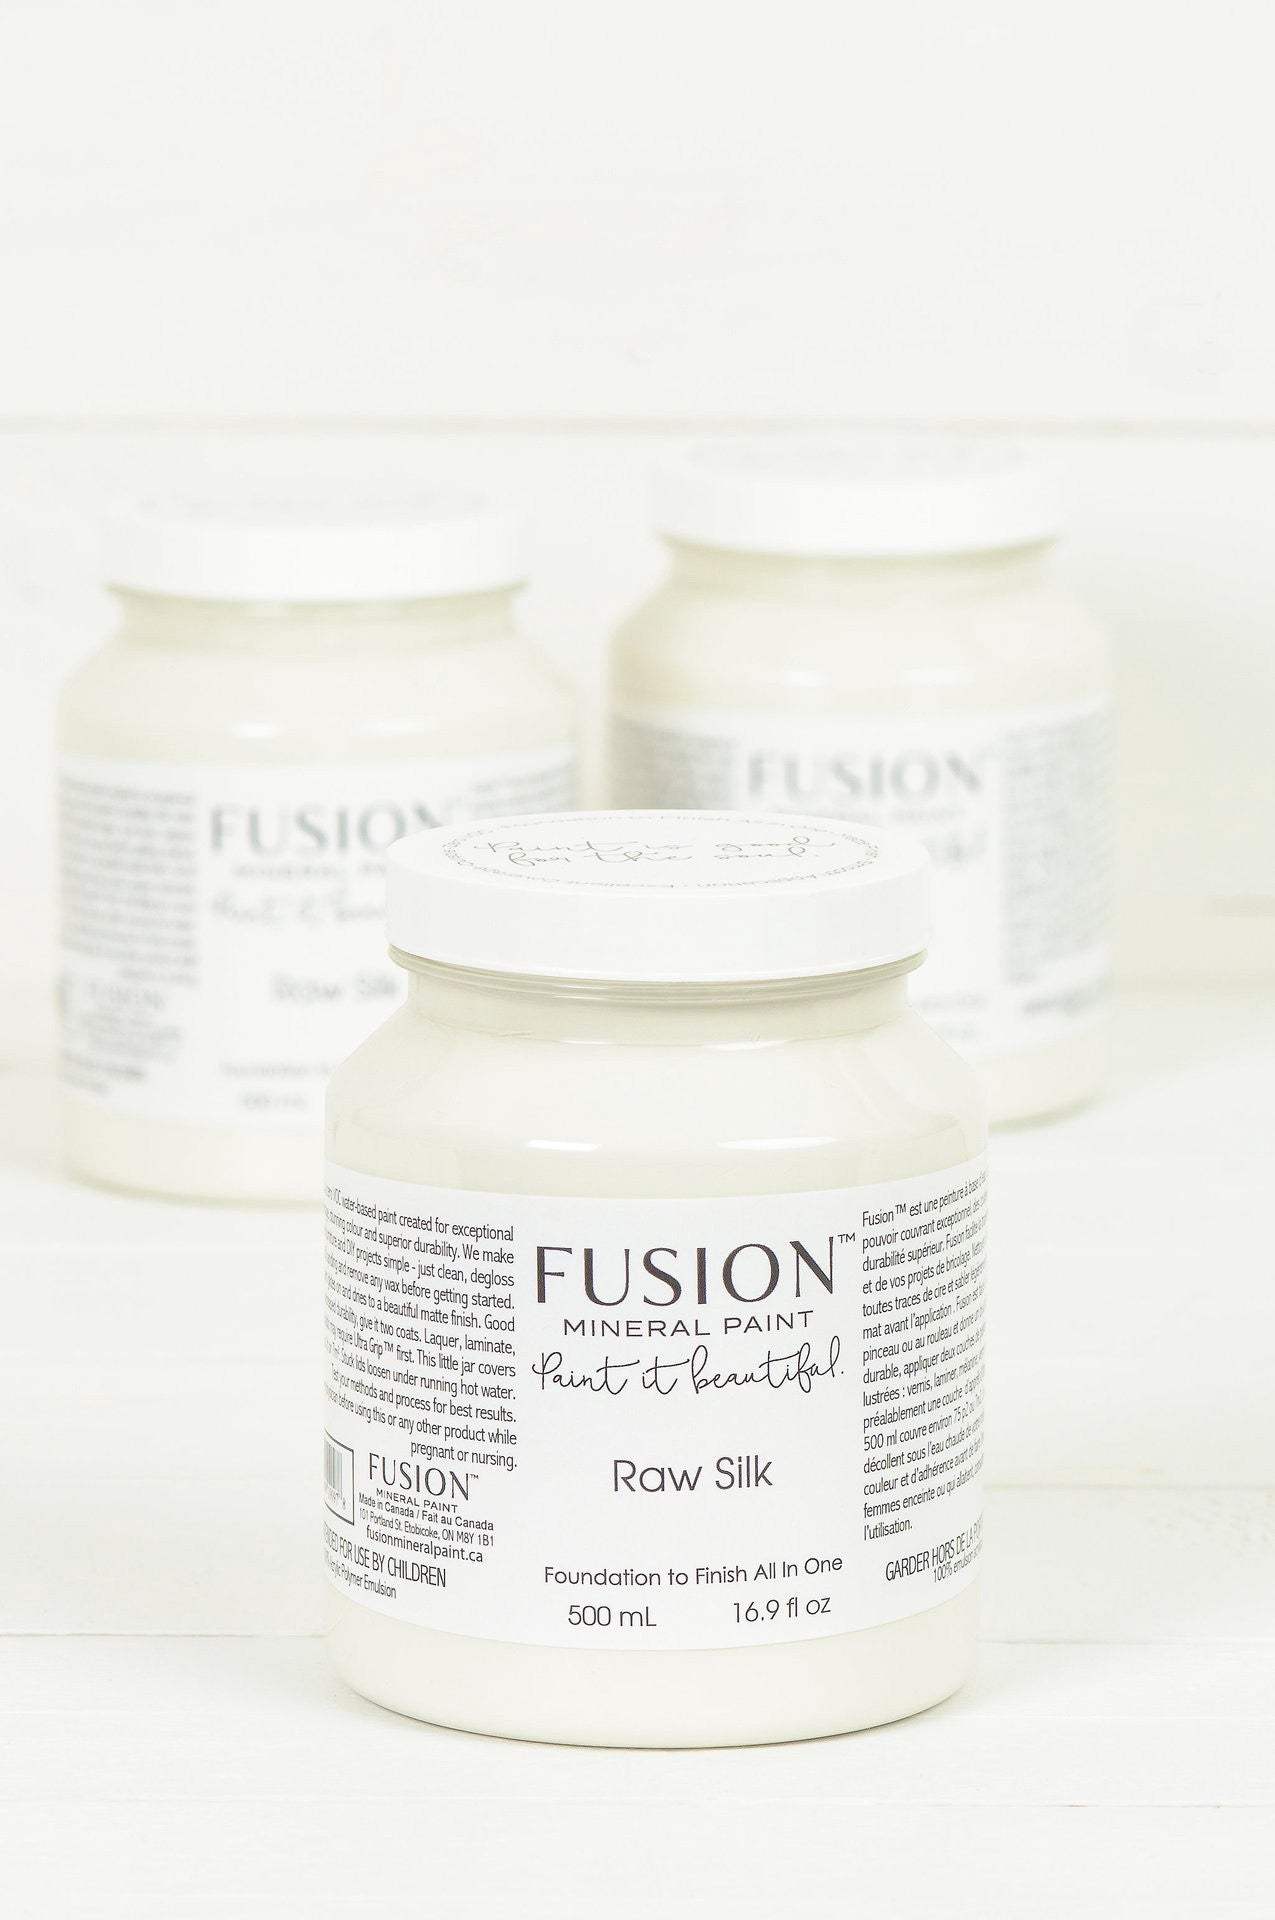 Raw Silk - Fusion Mineral Paint Paint > Fusion Mineral Paint > Furniture Paint 500ml